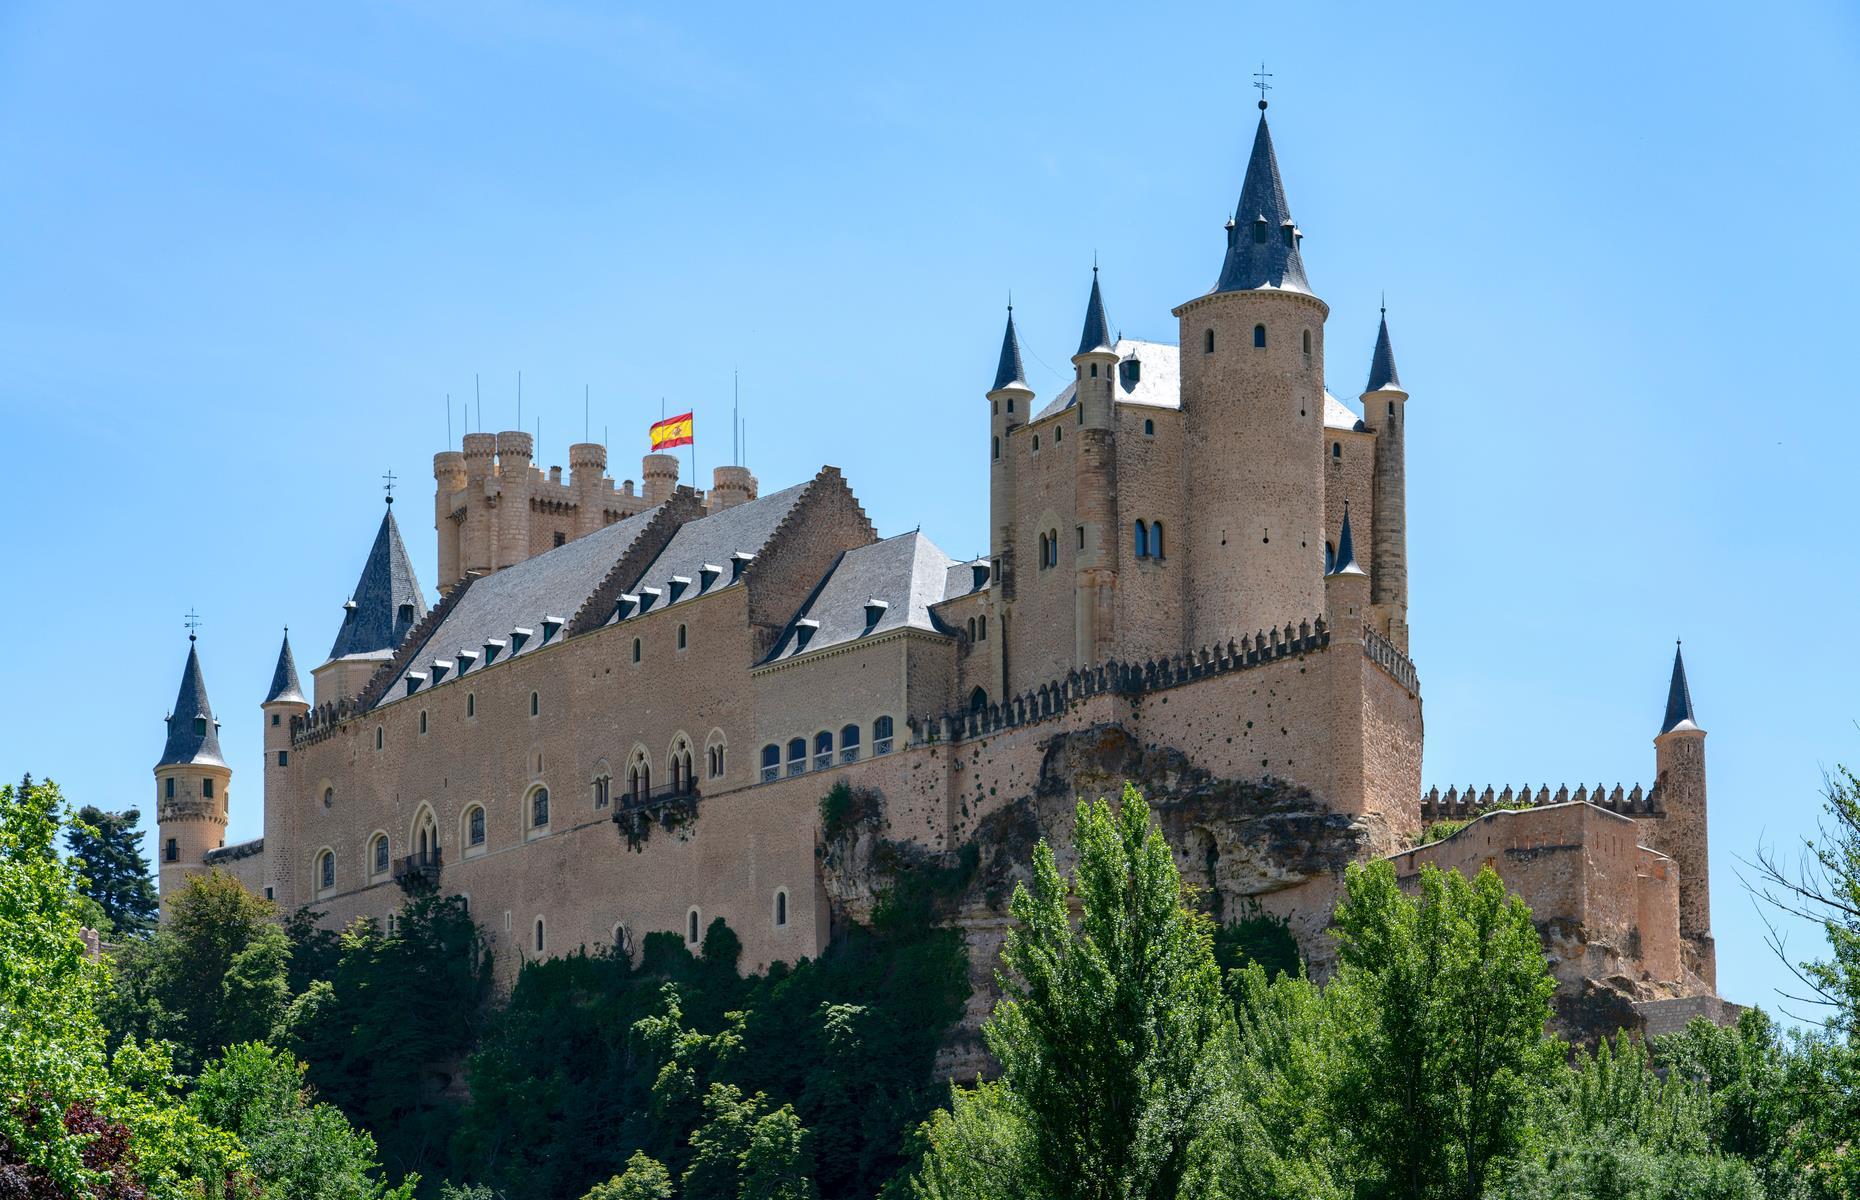 <p>The formidable Alcázar of Segovia was allegedly central to Walt Disney’s vision for the Evil Queen’s pointy stone castle in the 1937 film <em>Snow White and the Seven Dwarfs</em>. Perched on a rock with a white façade, witches hat towers and deep moat, the part-Moorish, part-19th-century fortress is everything you could want from a wicked queen’s lair.</p>